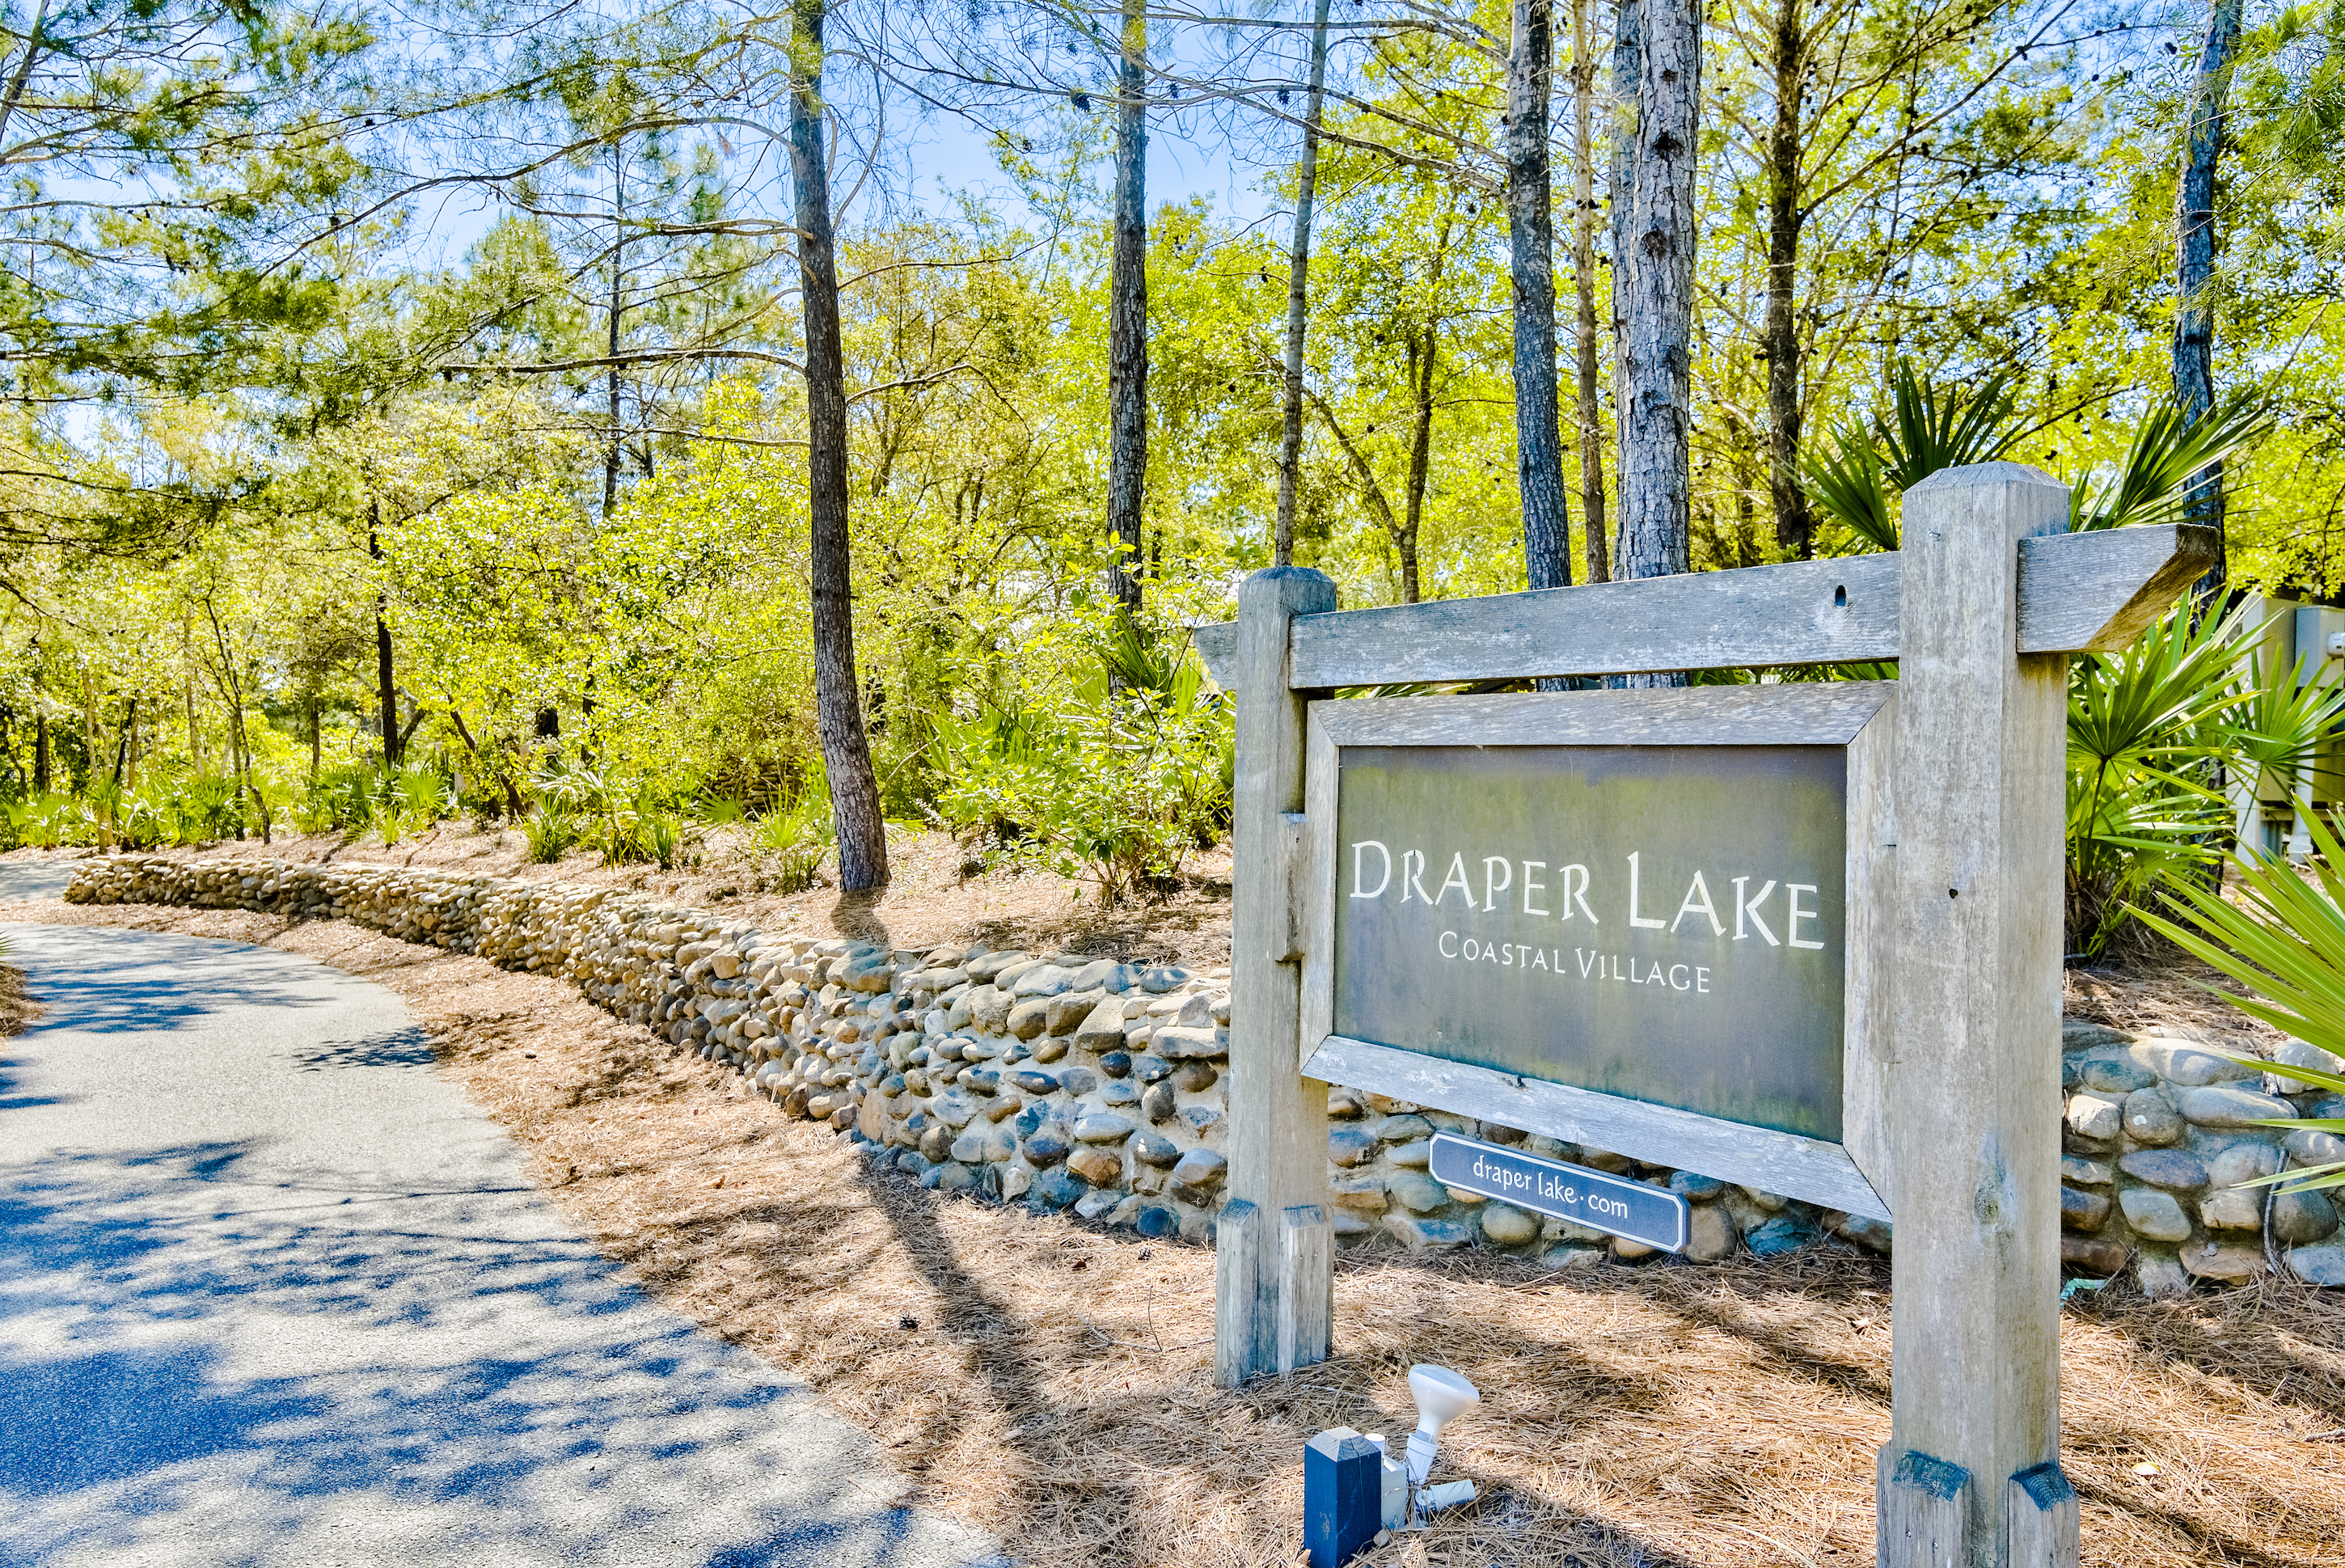 The entrance sign surrounded by forest at the gated Draper Lake community